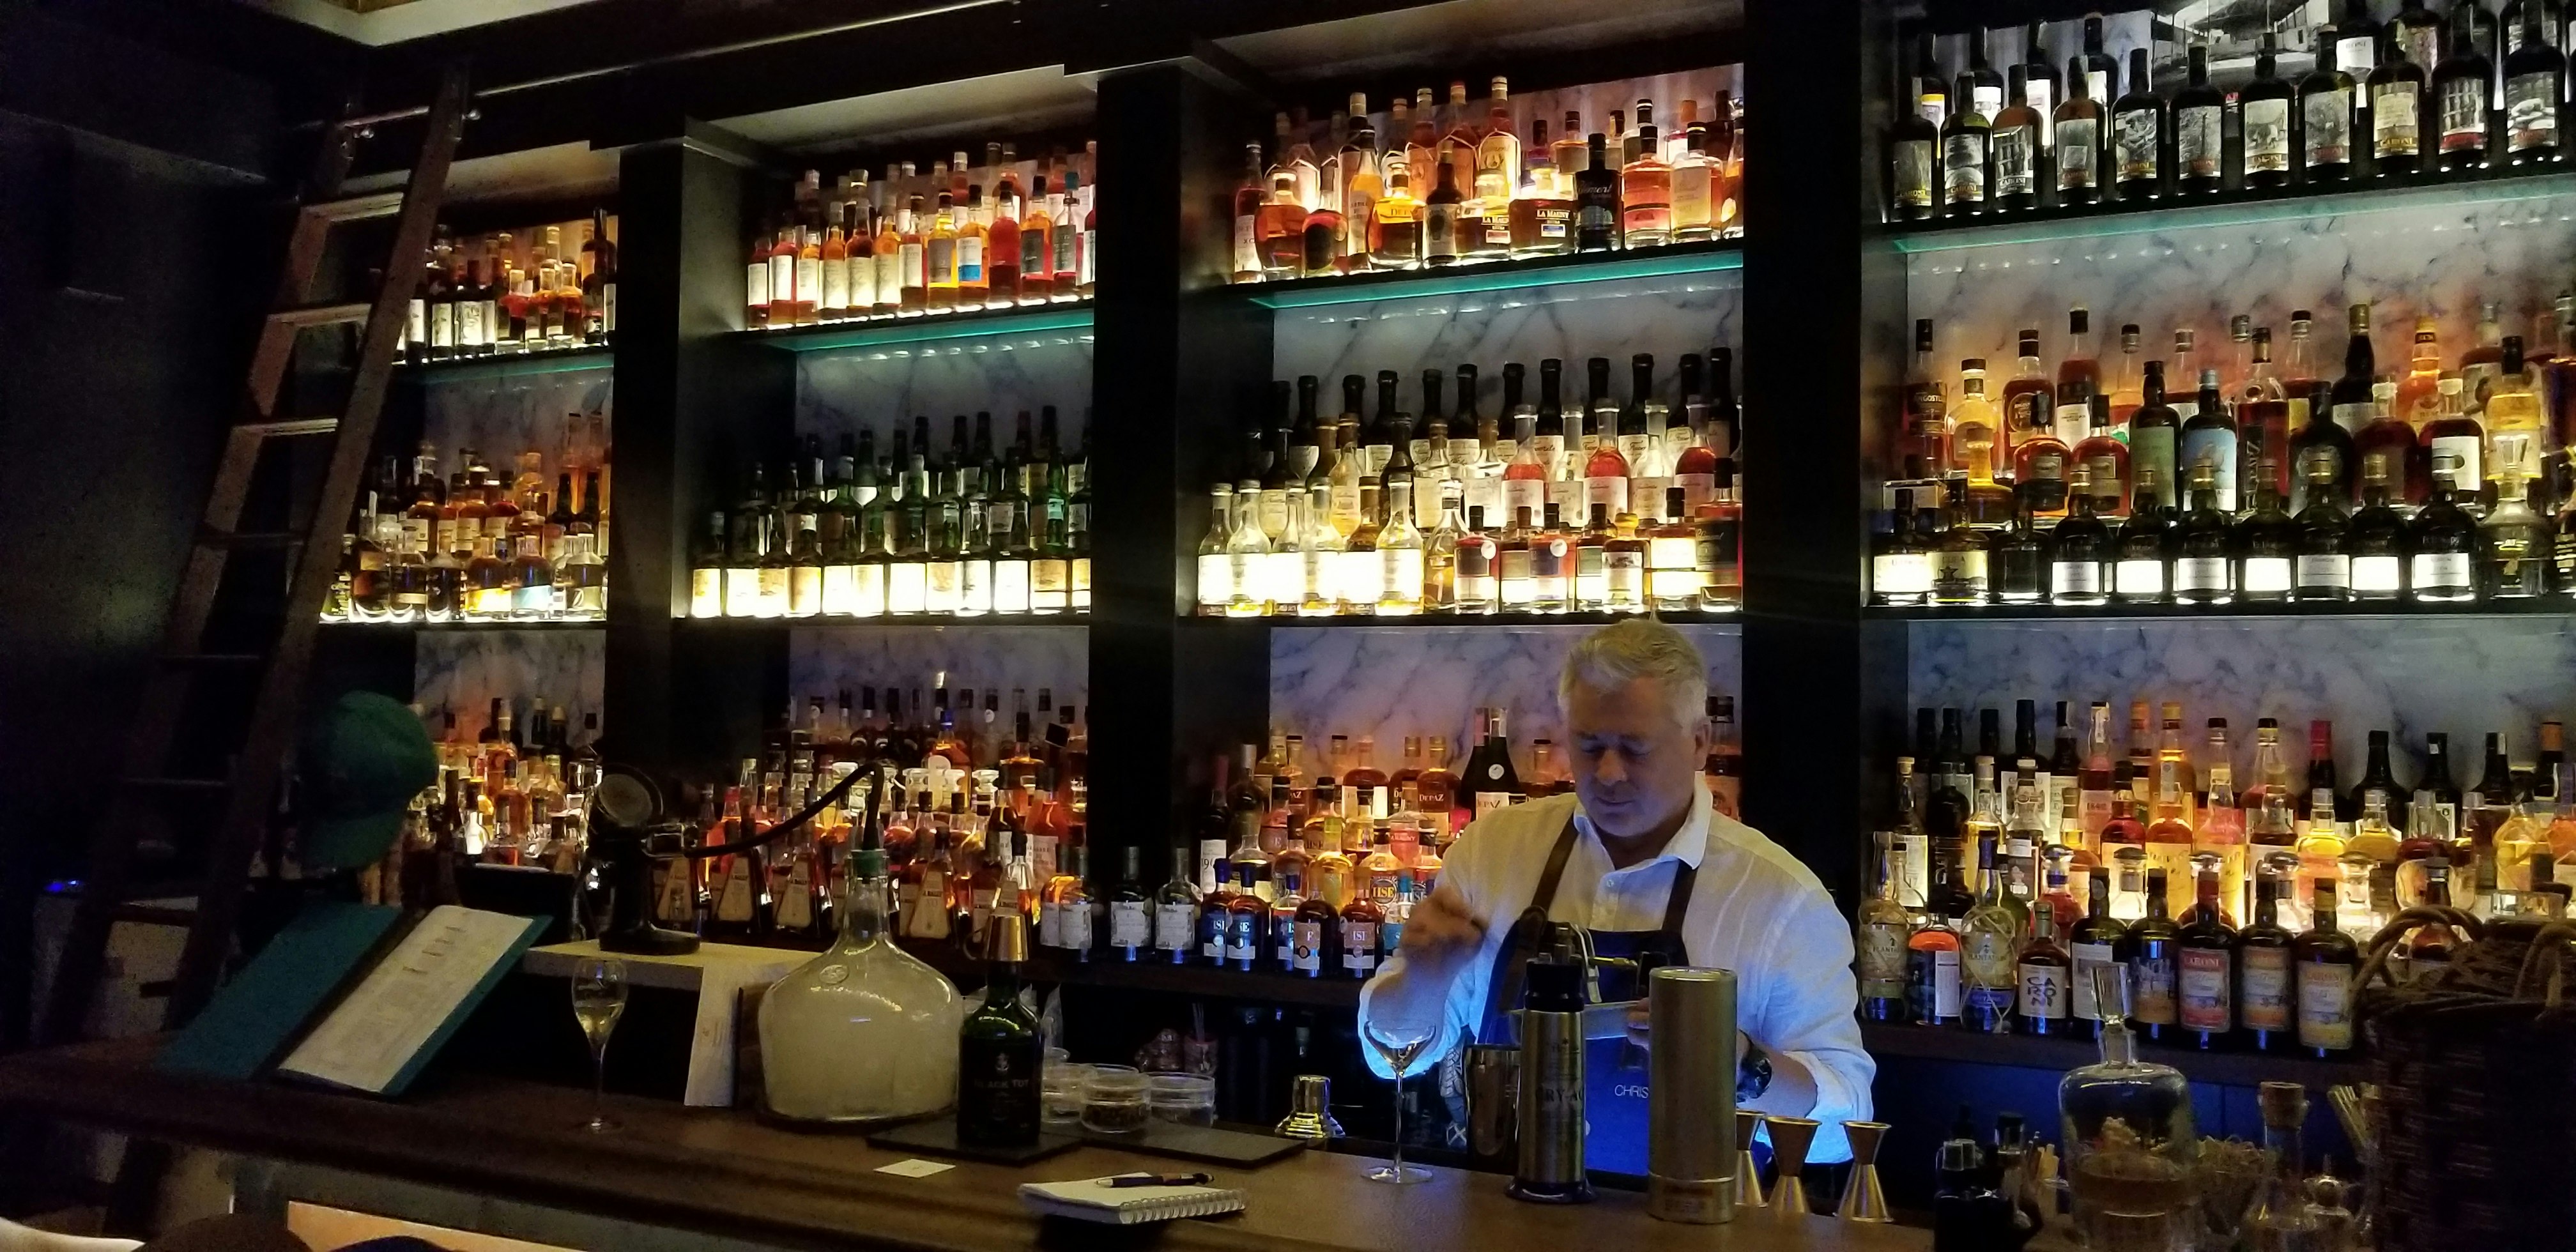 A bartender wearing a dark blue apron mixes a drink in front of a large rum display 